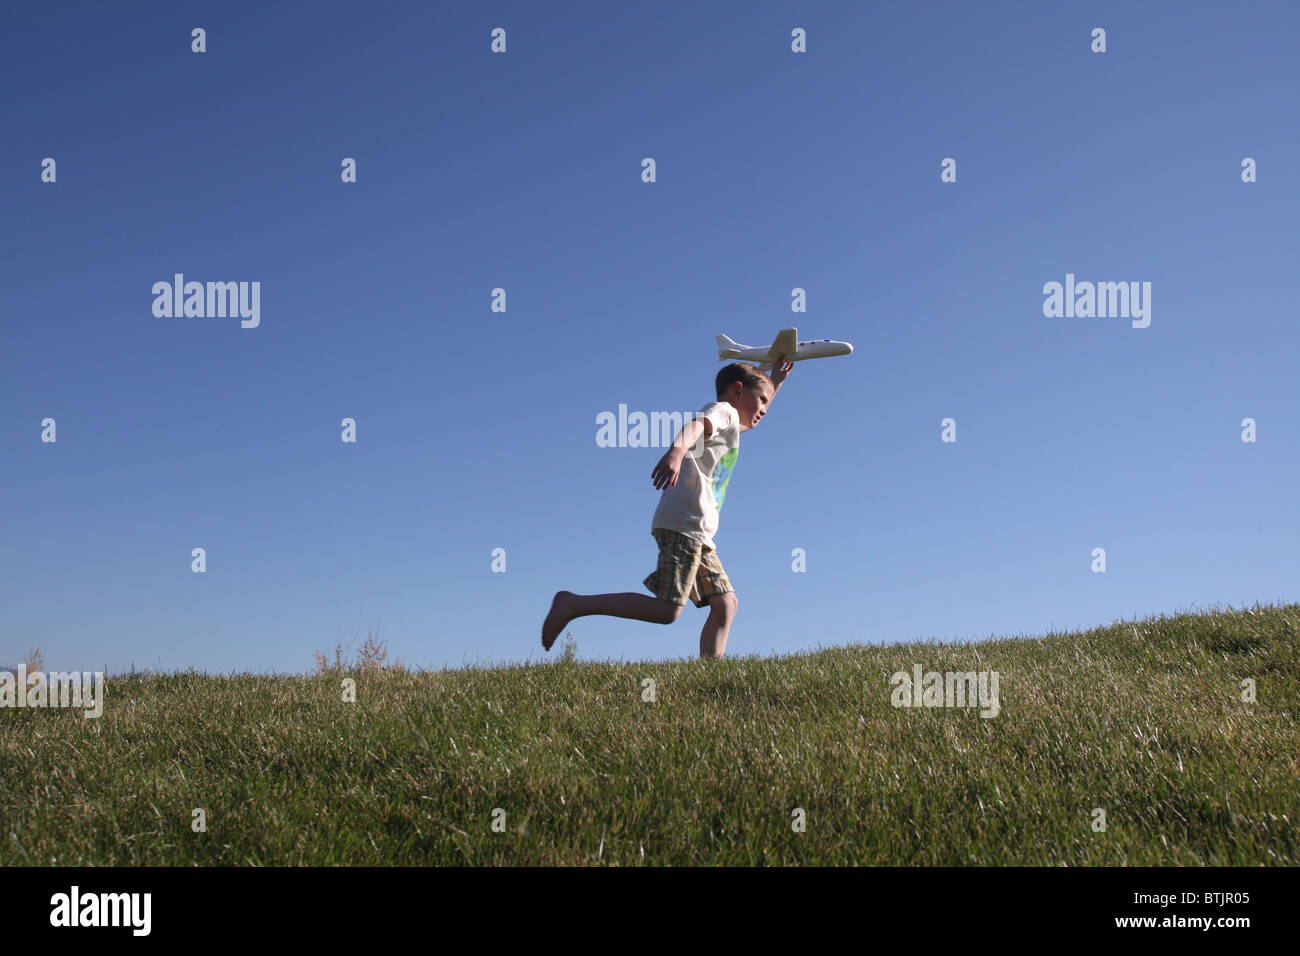 young boy running w/toy airplane,ready to let it fly Stock Photo